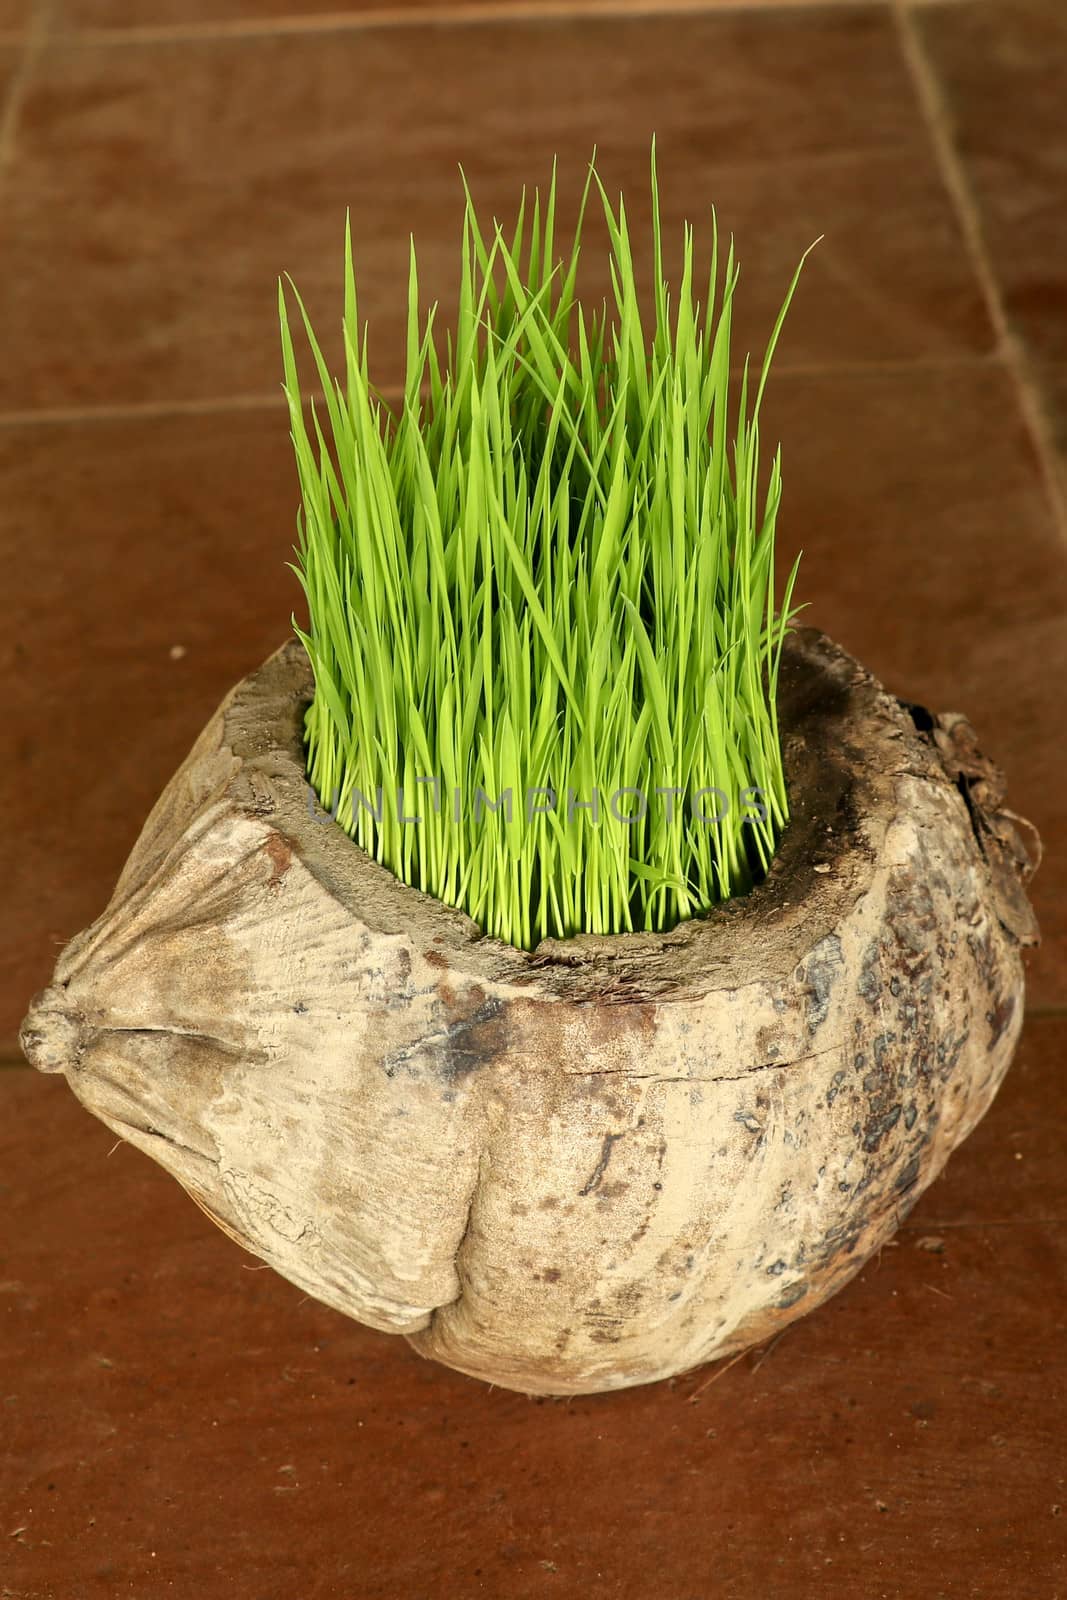 Planting Sprout in Earth Day. Bunch of young rice plants in natural pot made of old dry coconut. A new beginning life in the form of rice seedlings. Flower pot on background with brown ceramic tiles.